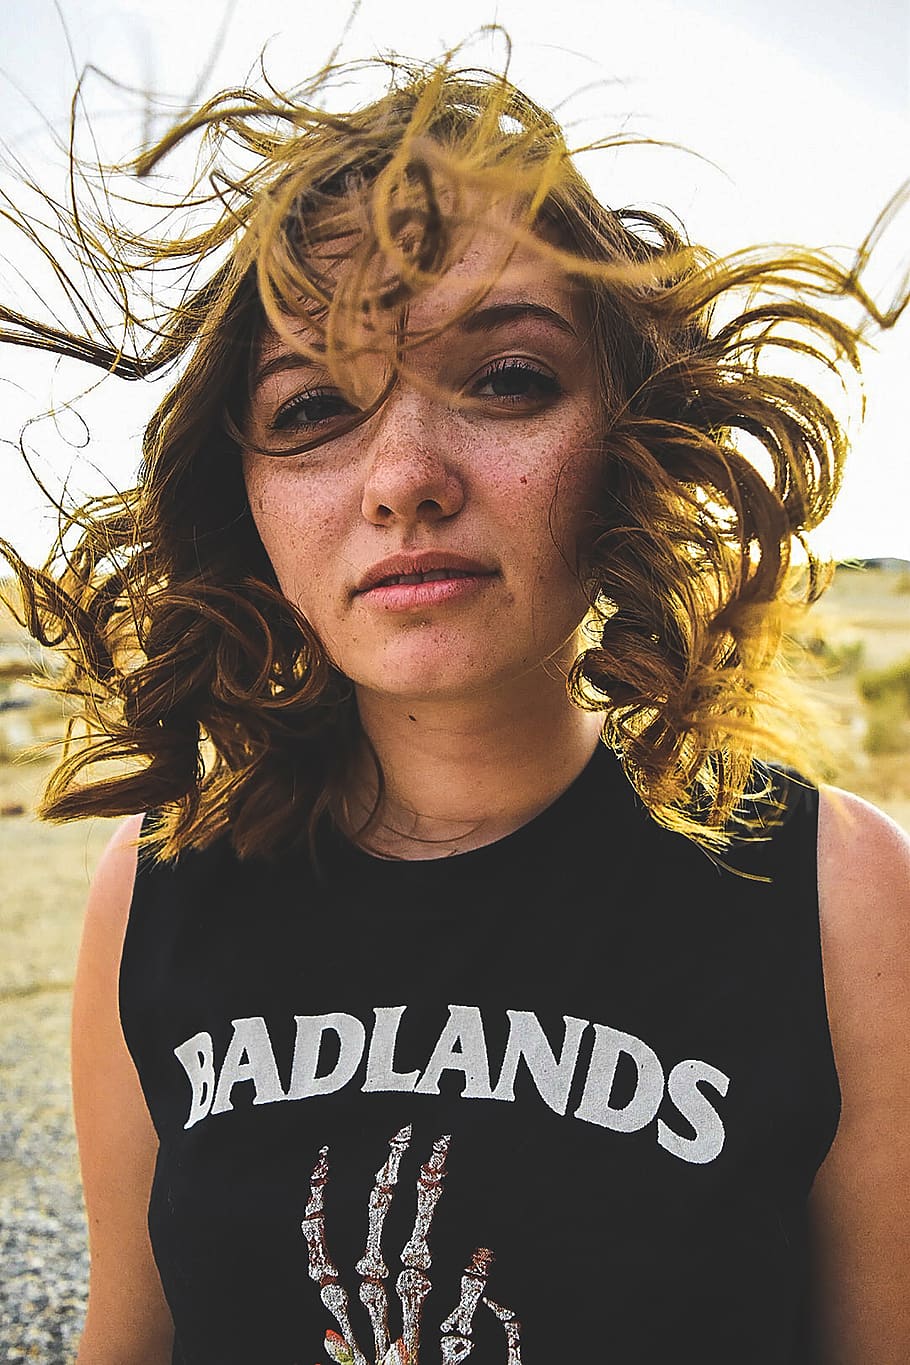 united states, salton city, abandoned, hair, wind, queen, front view